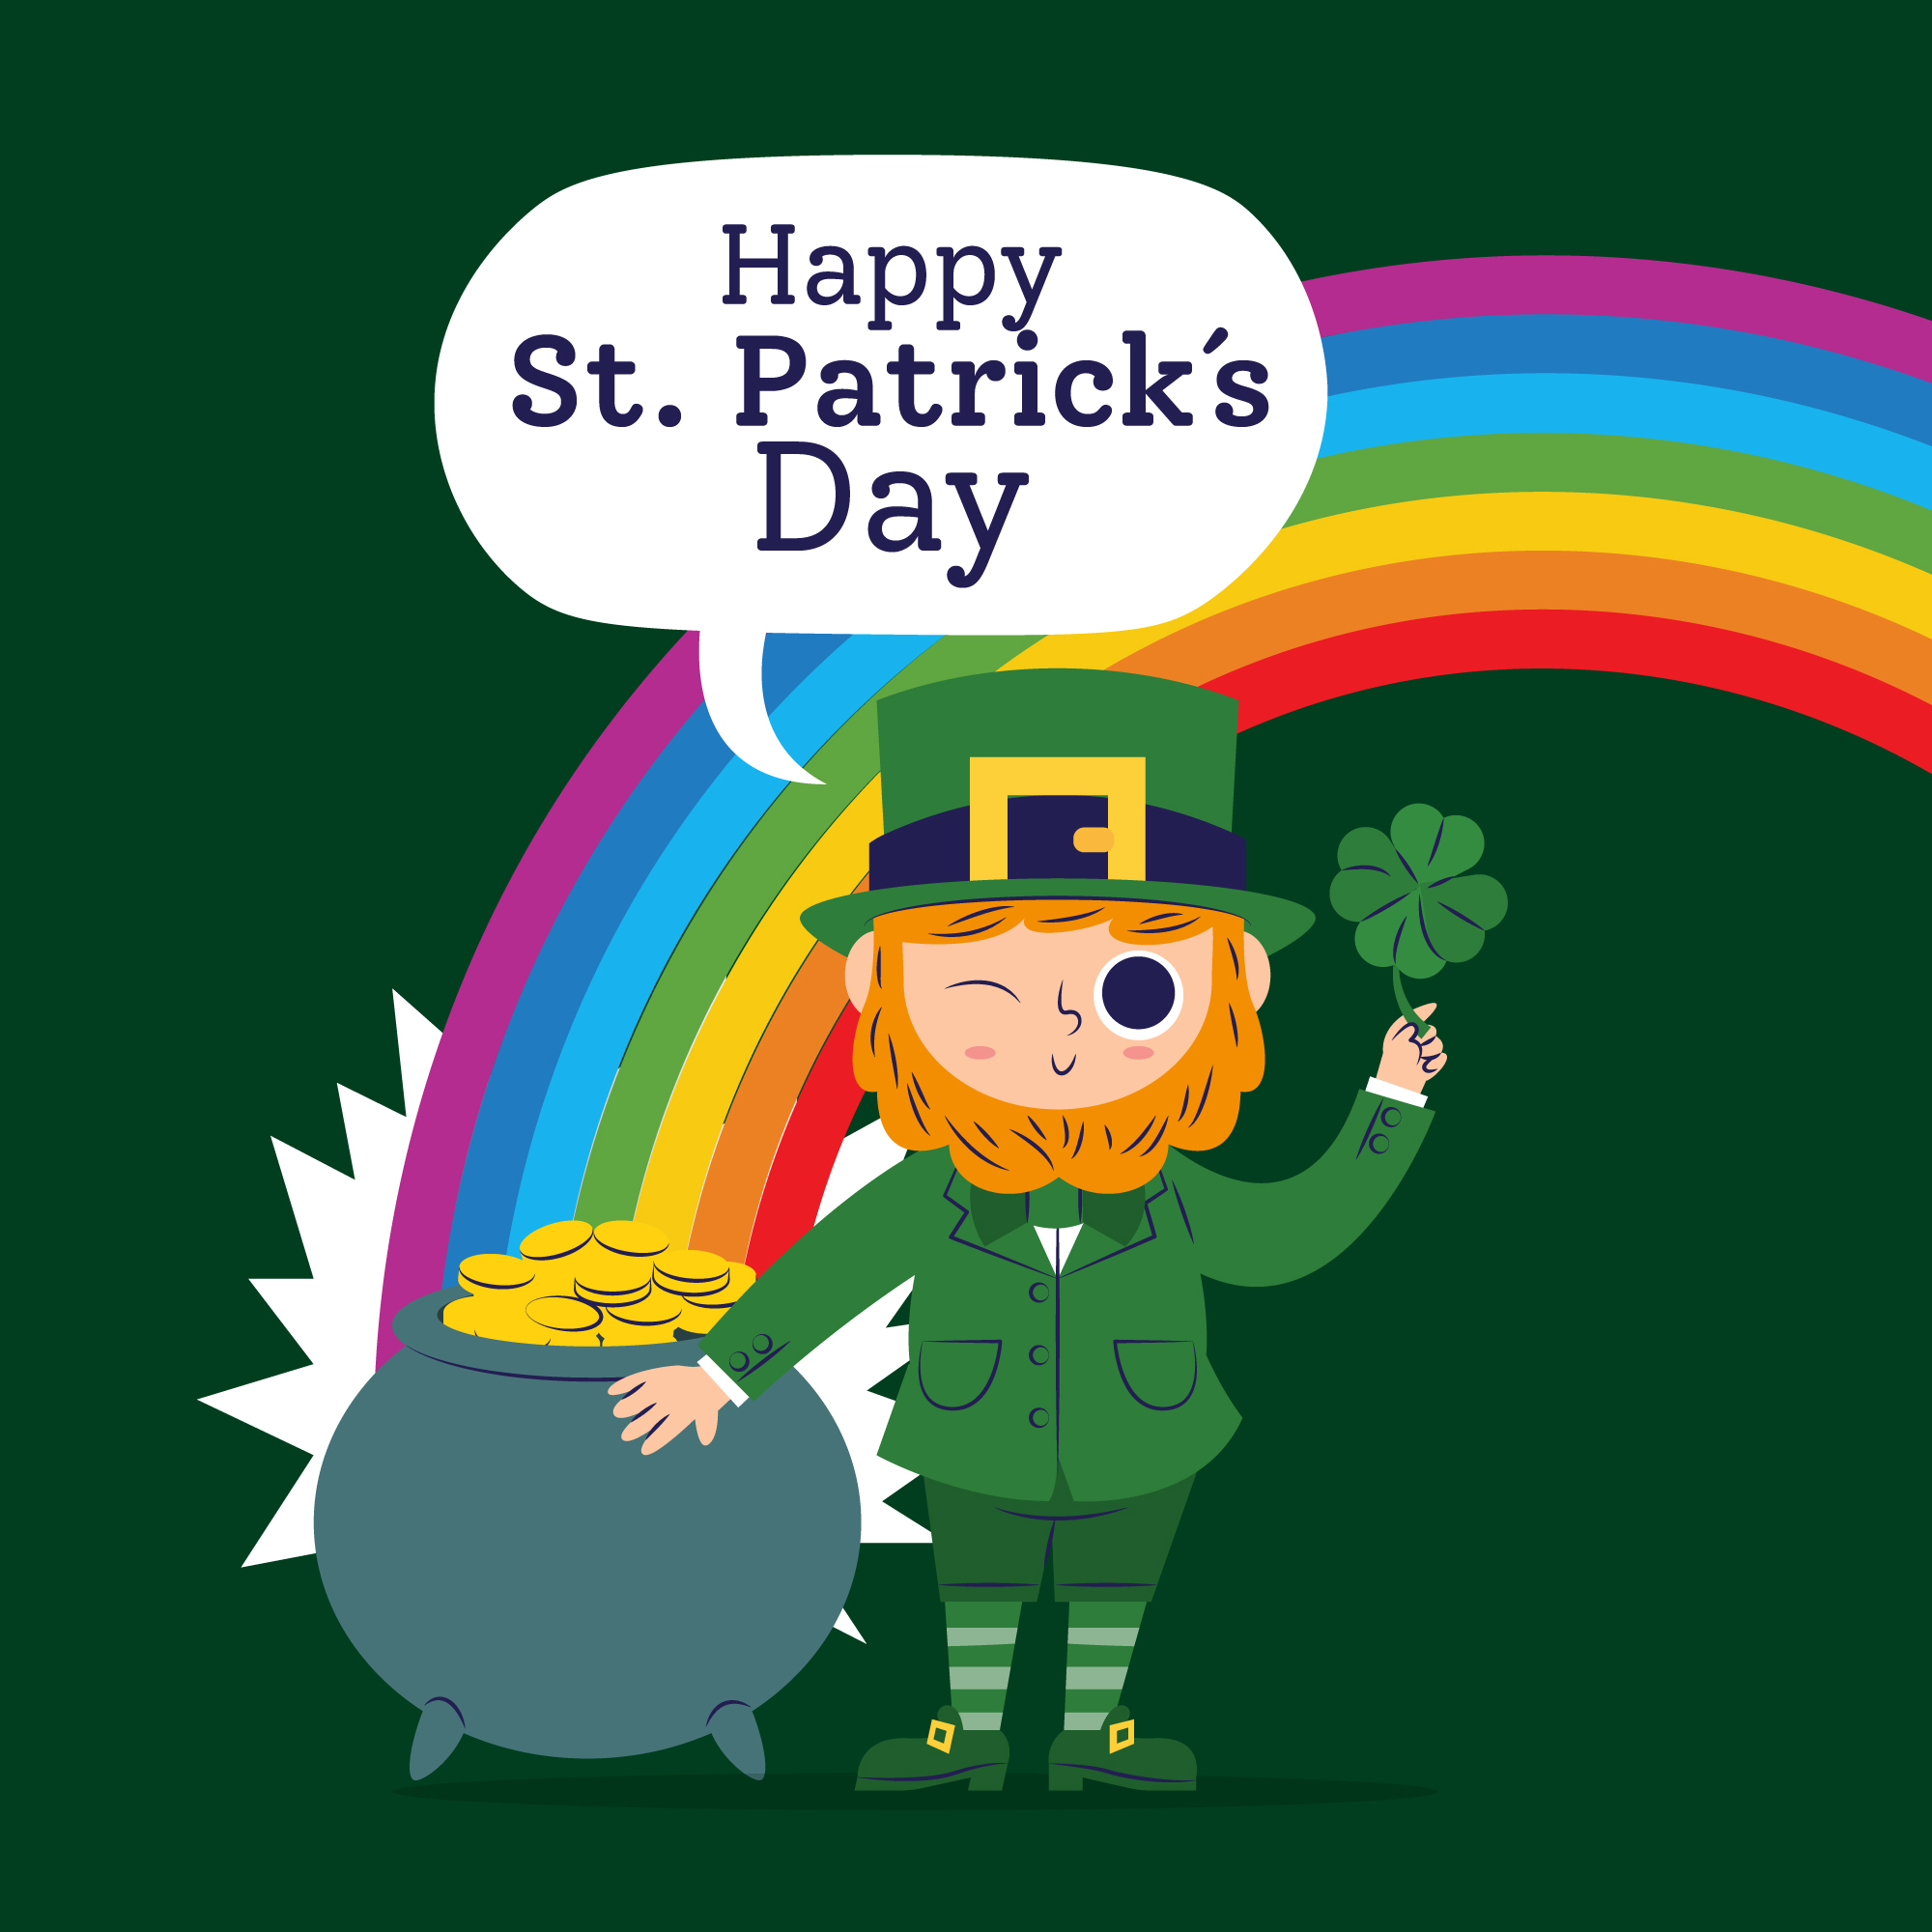 Illustration of a winking leprechaun holding a four leaf clover next to a pot of gold and a rainbow with a word bubble that says Happy St. Patrick's Day.